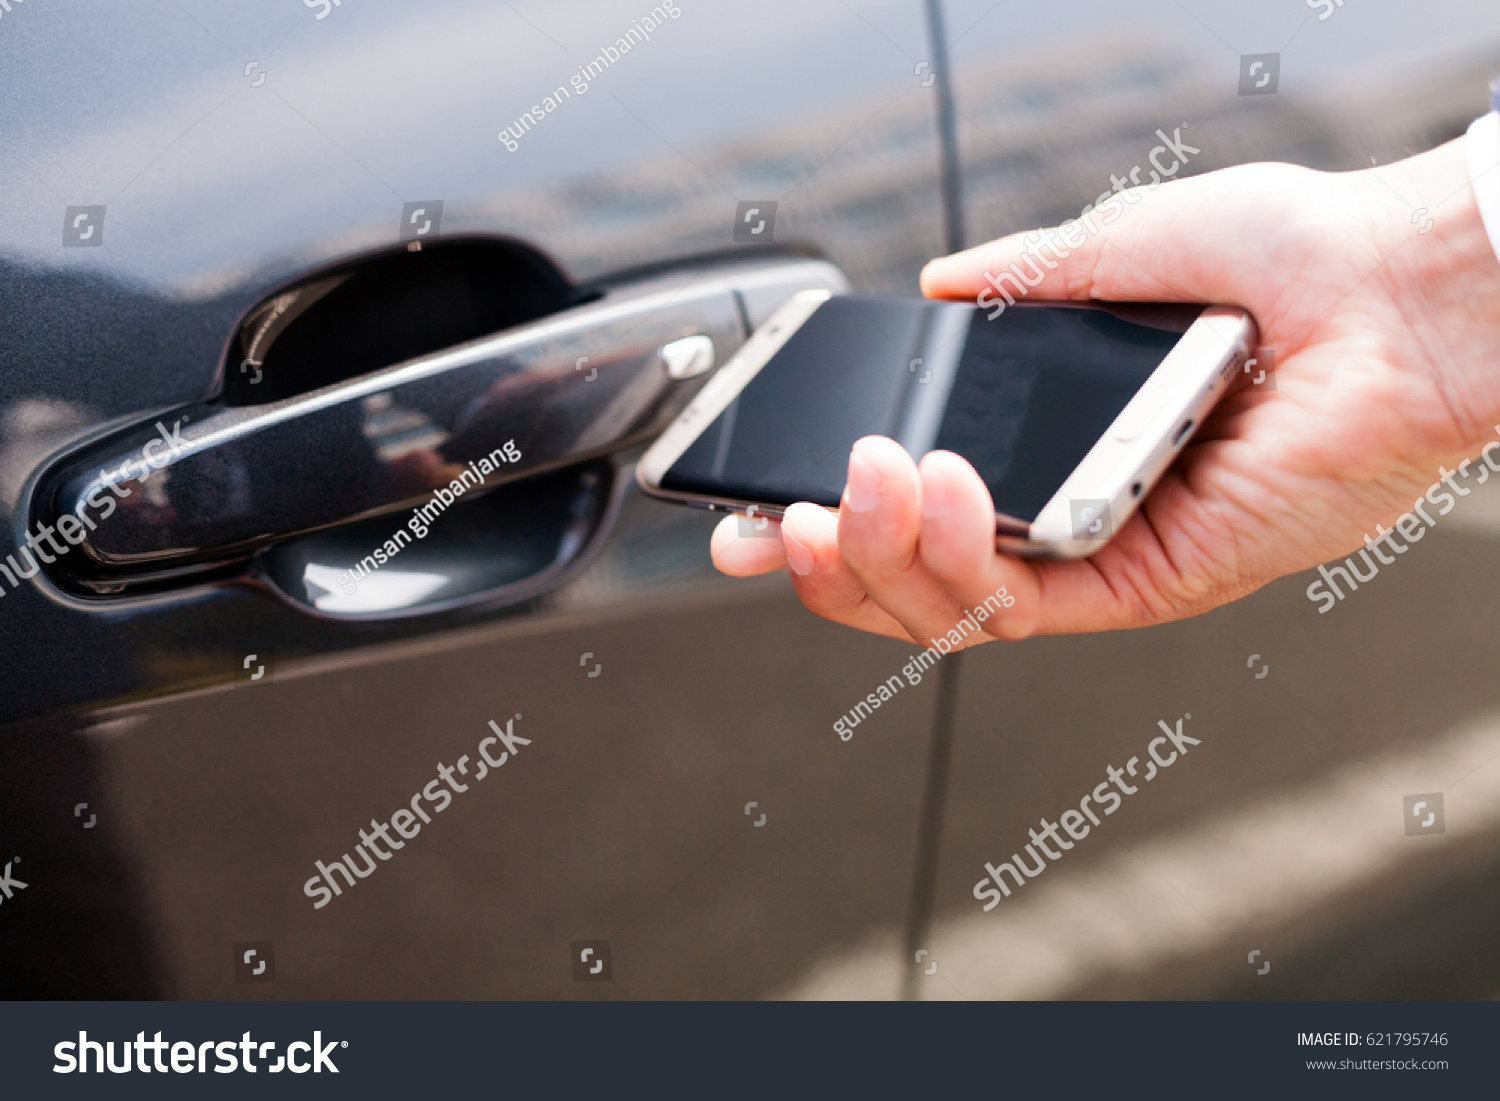 Opening and closing car door with smart phone / Automobile, IT, information communication #621795746